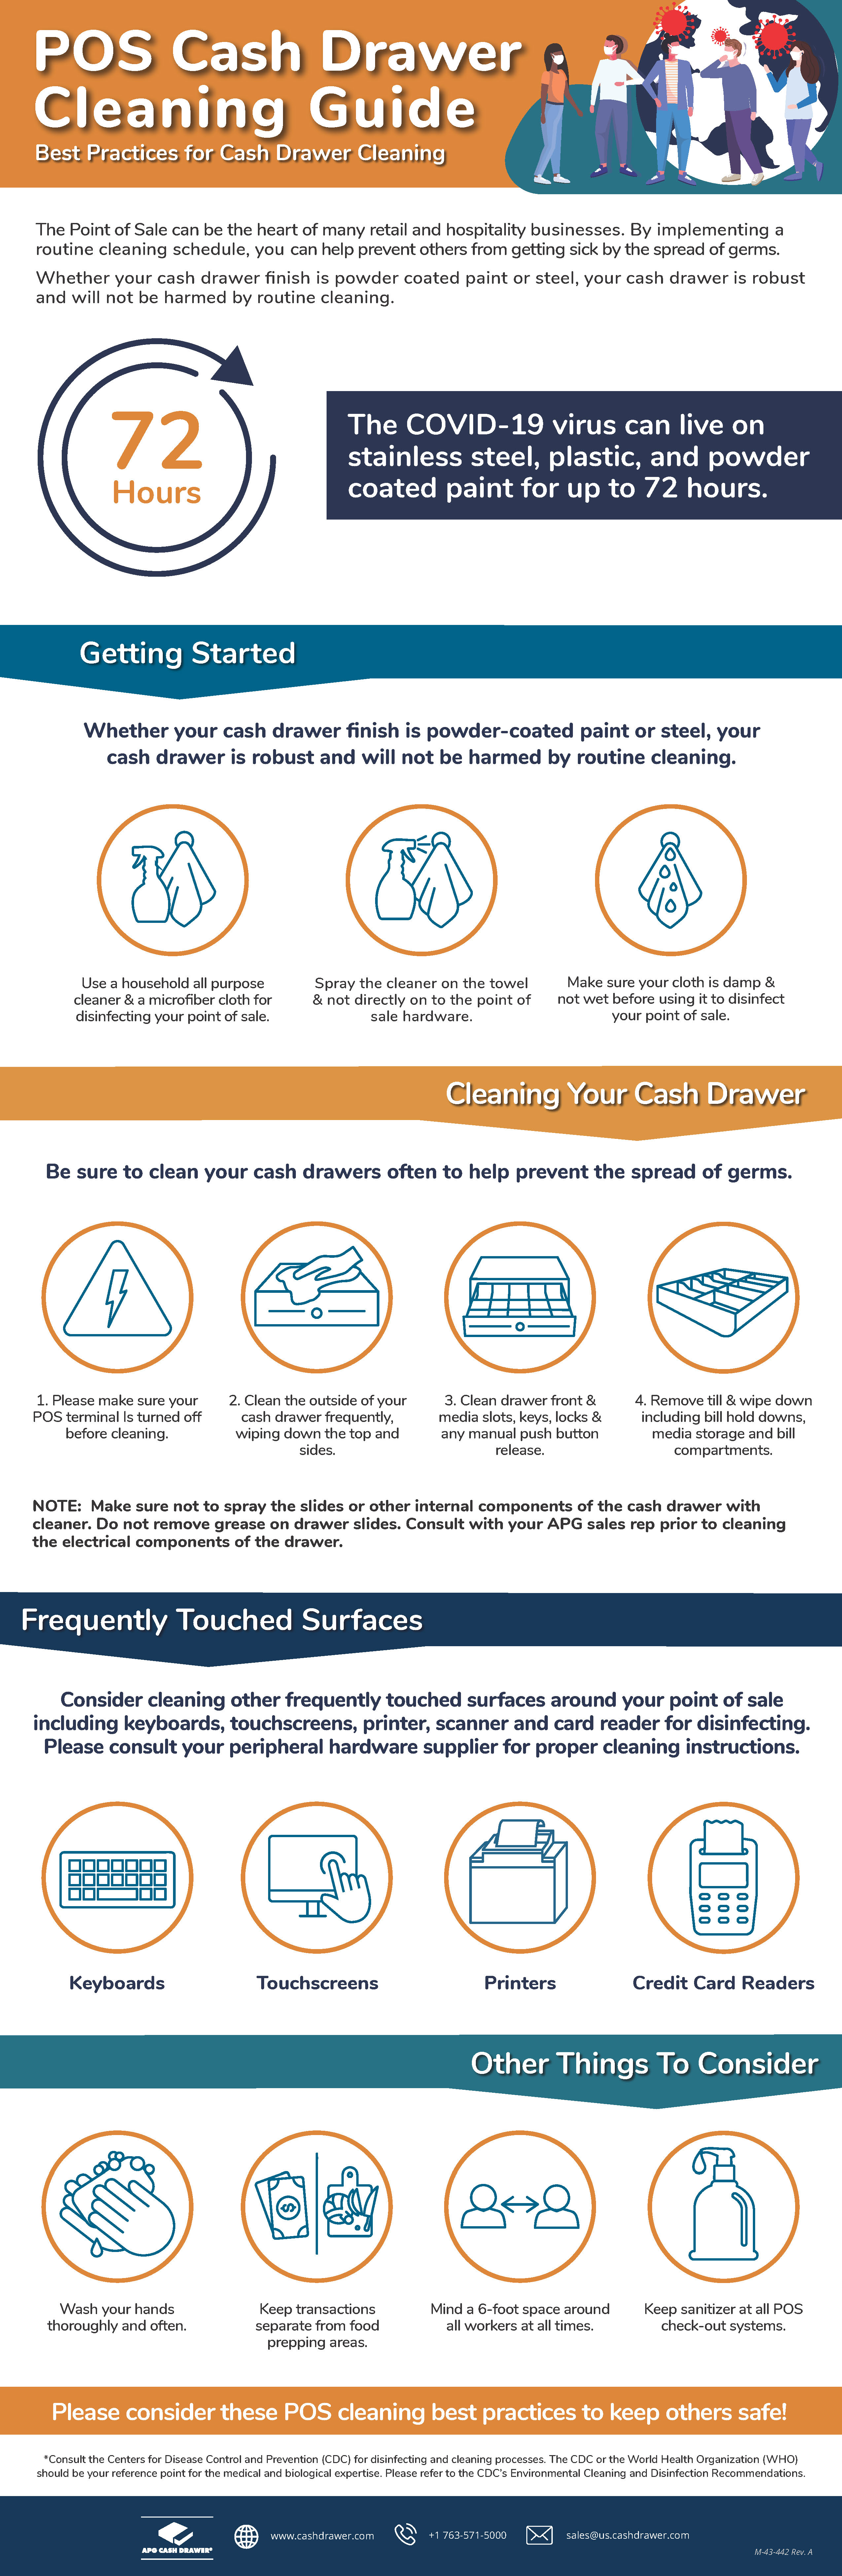 M-43-443 Rev. A (POS Cash Drawer Cleaning Guide Infographic)